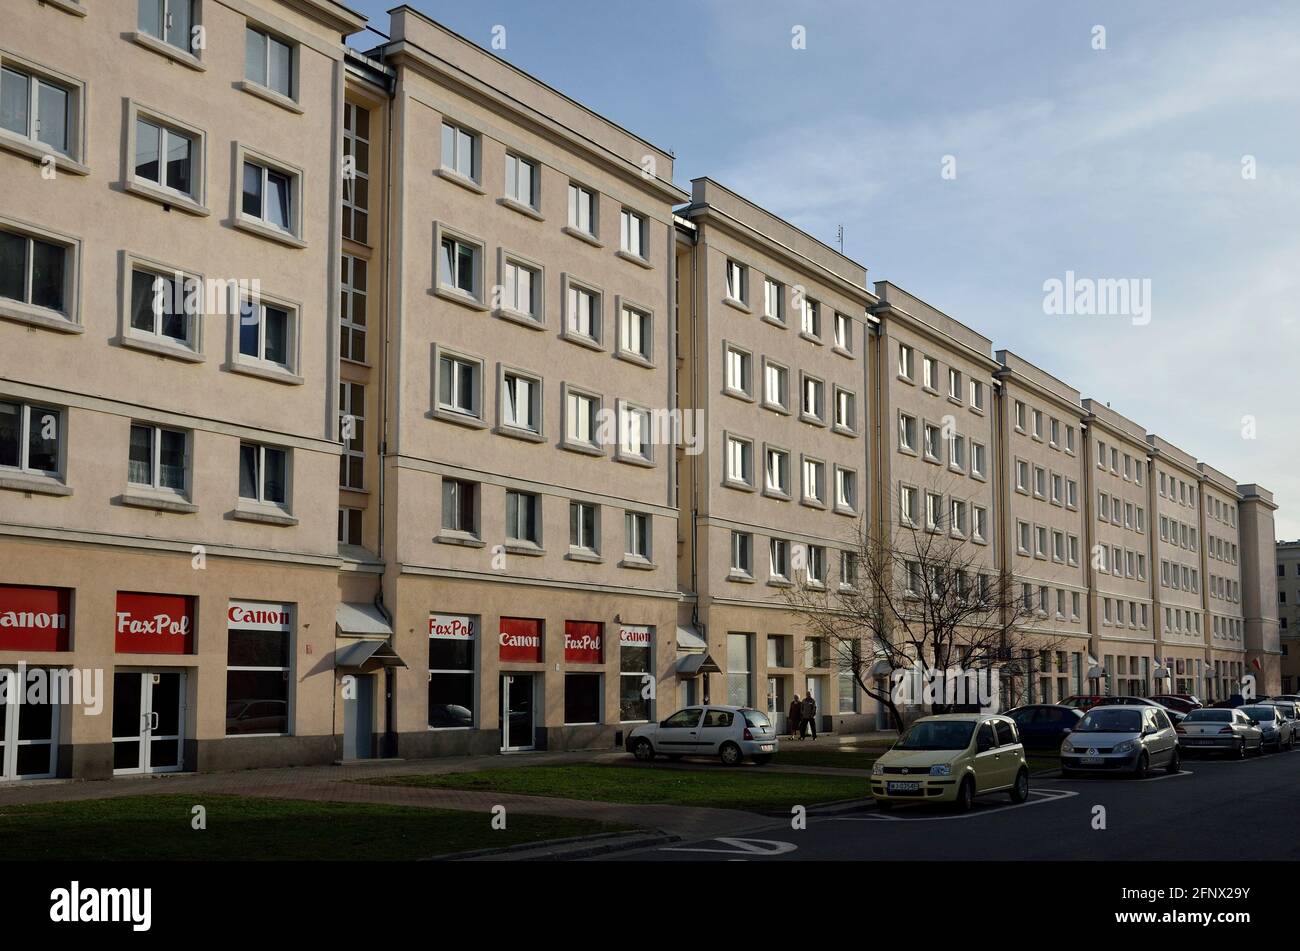 Residential buildings of Muranow neighbourhood, former Warsaw Ghetto area, Warsaw, Poland Stock Photo